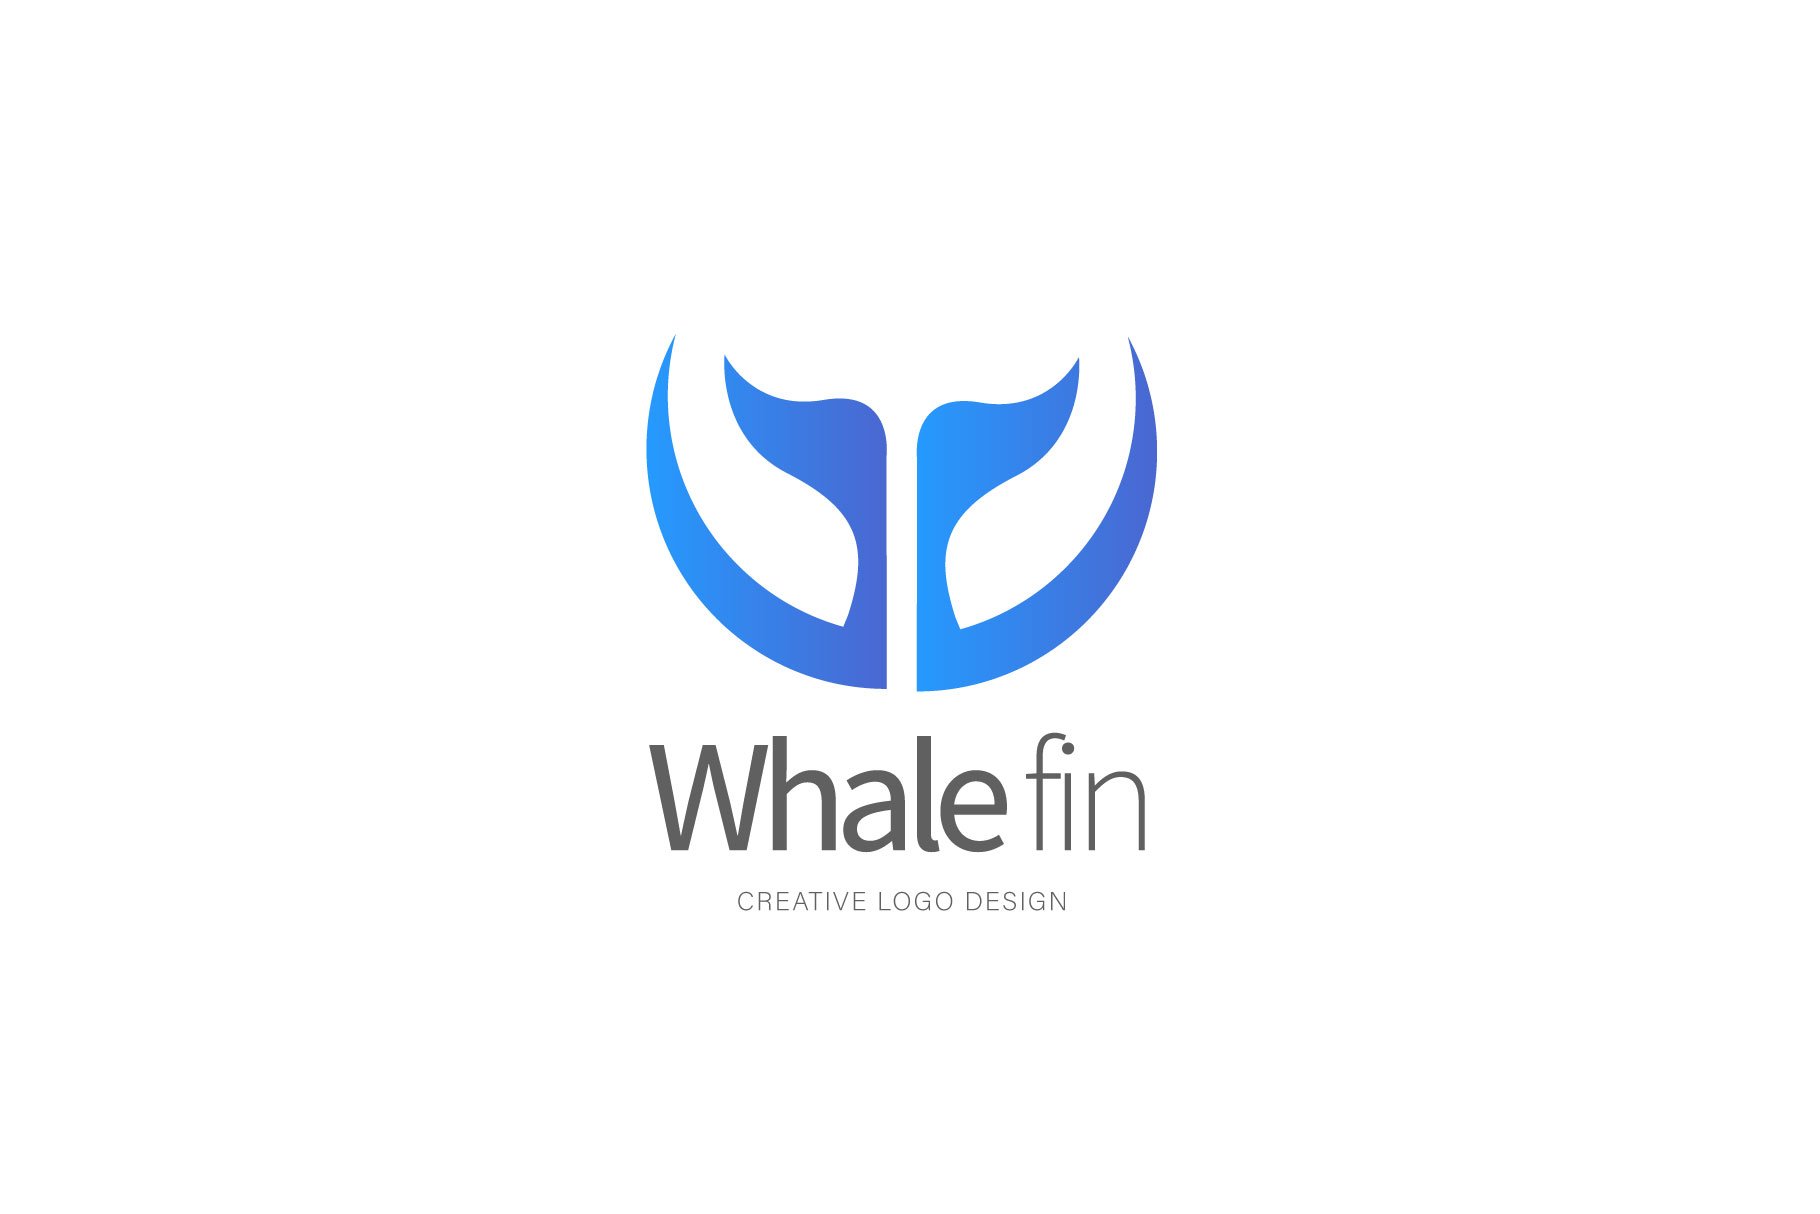 Whale fin logo cover image.